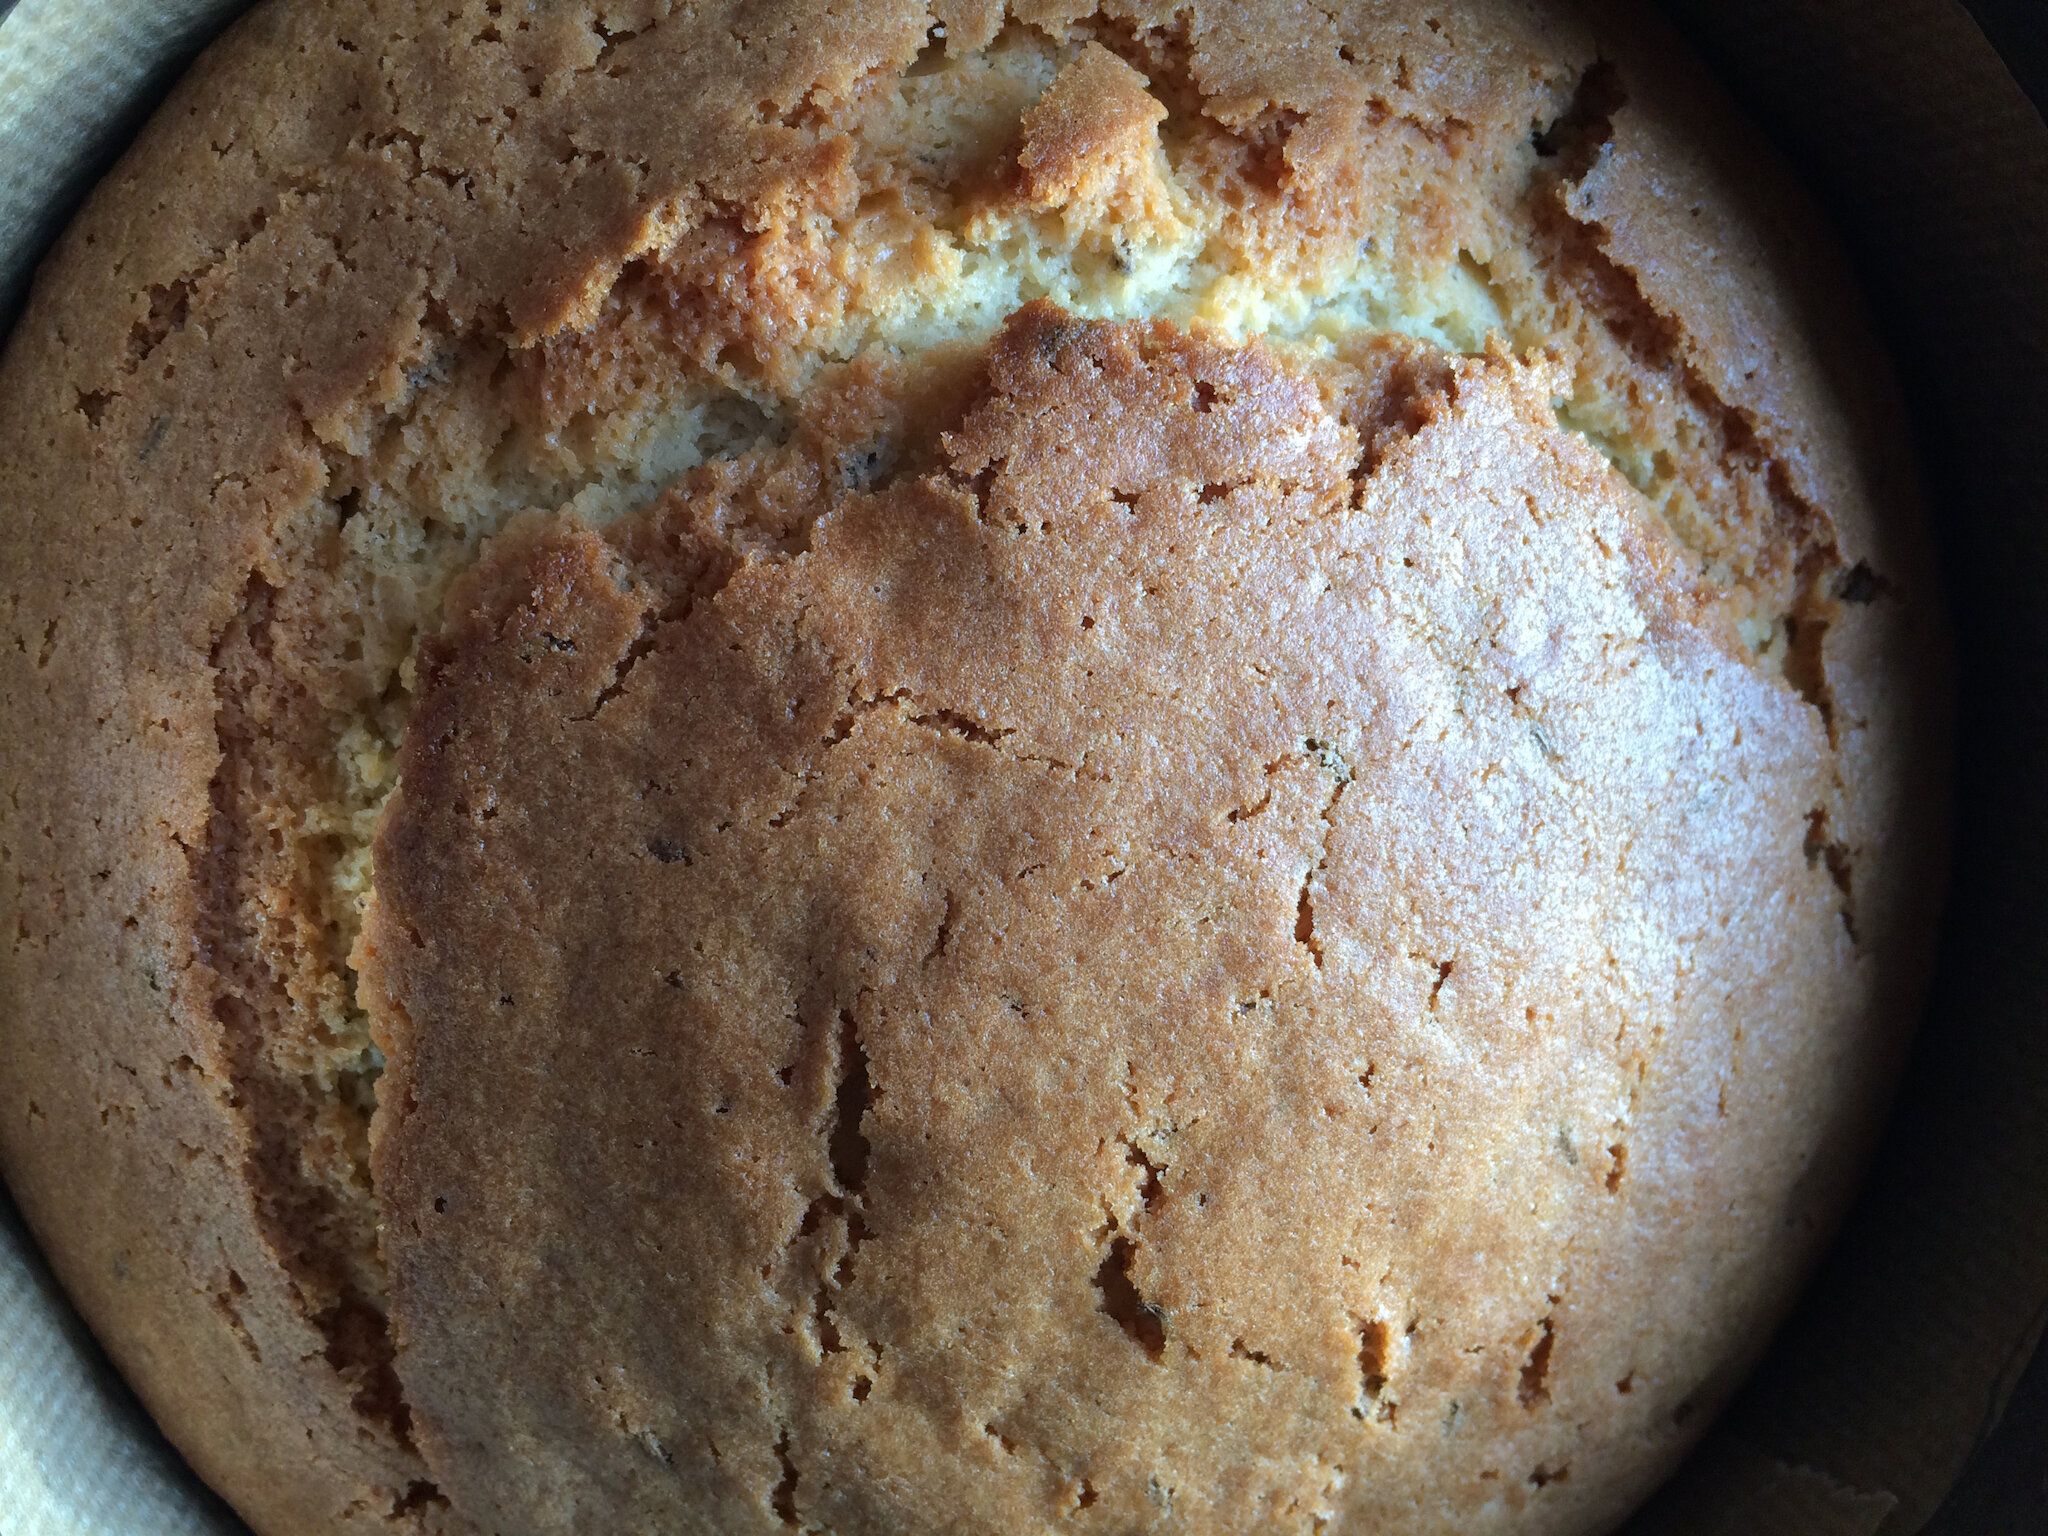 Seed Cake | The Hobbit; An Unexpected Party | InLiterature